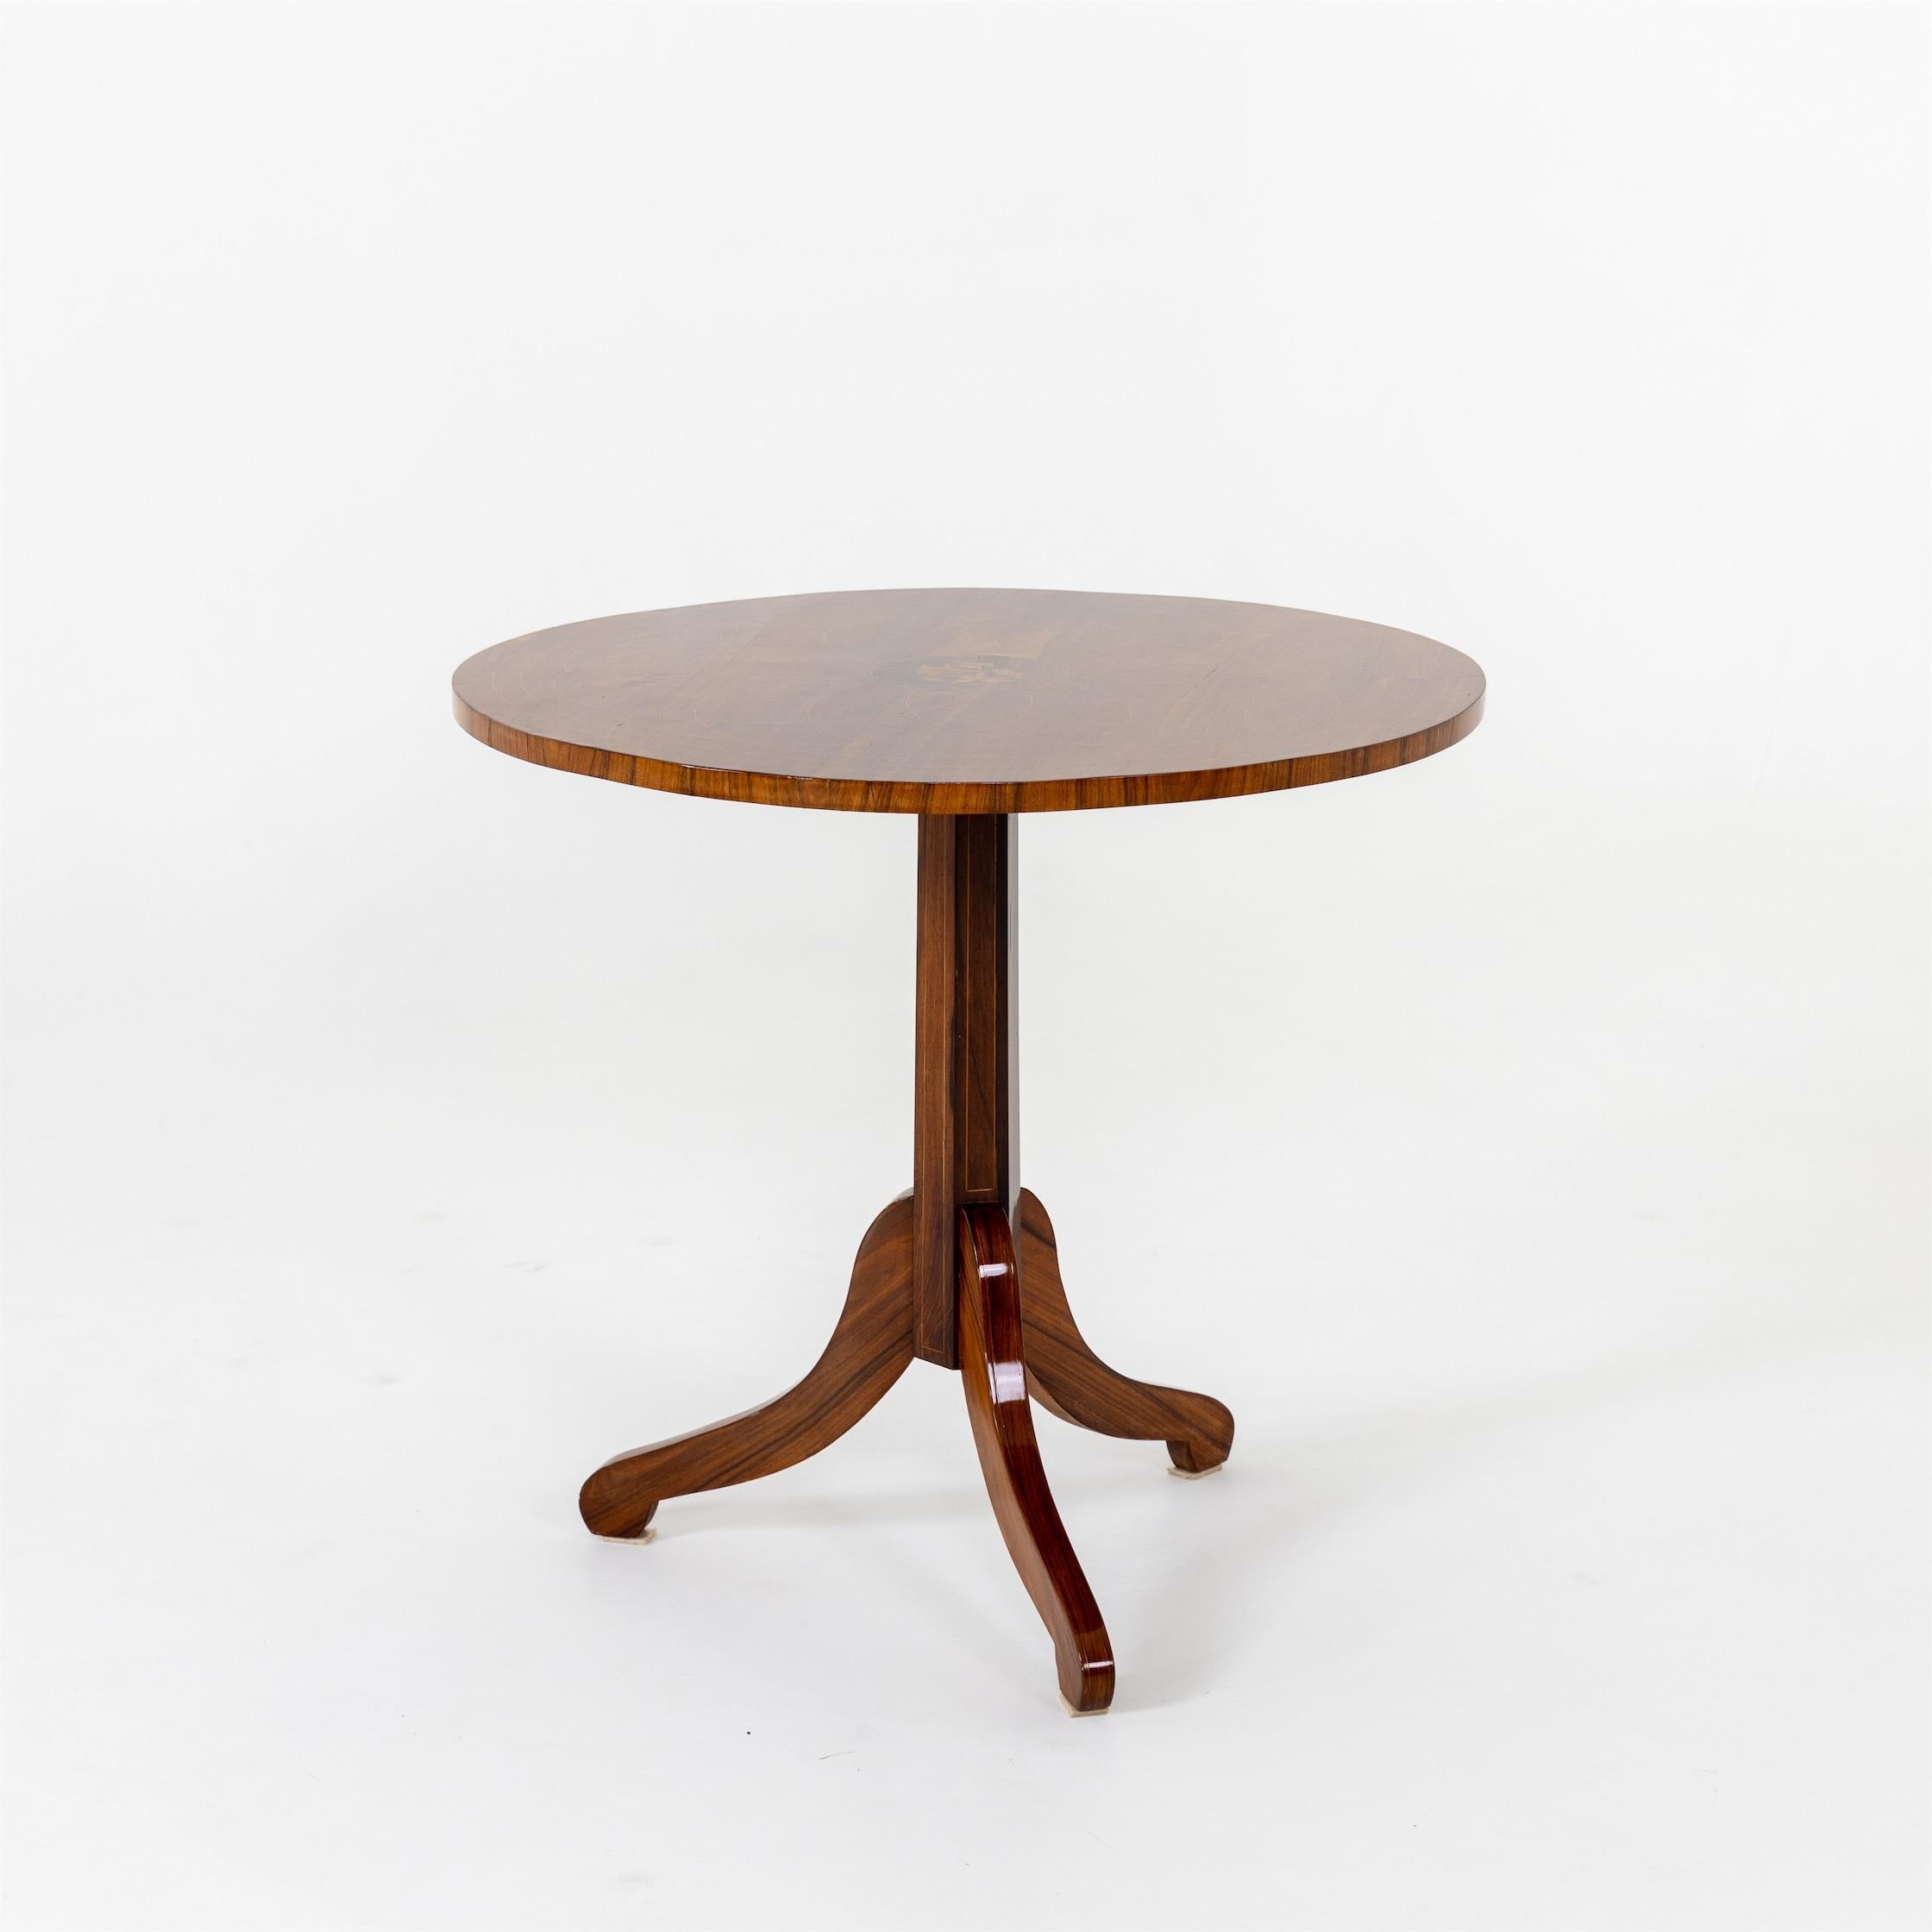 Charles X side table on a three-legged stand with octagonal column base and round tabletop. This, like the stem, is decorated with fine radial thread inlays as well as floral marquetry. The tabletop is hinged. The table was professionally